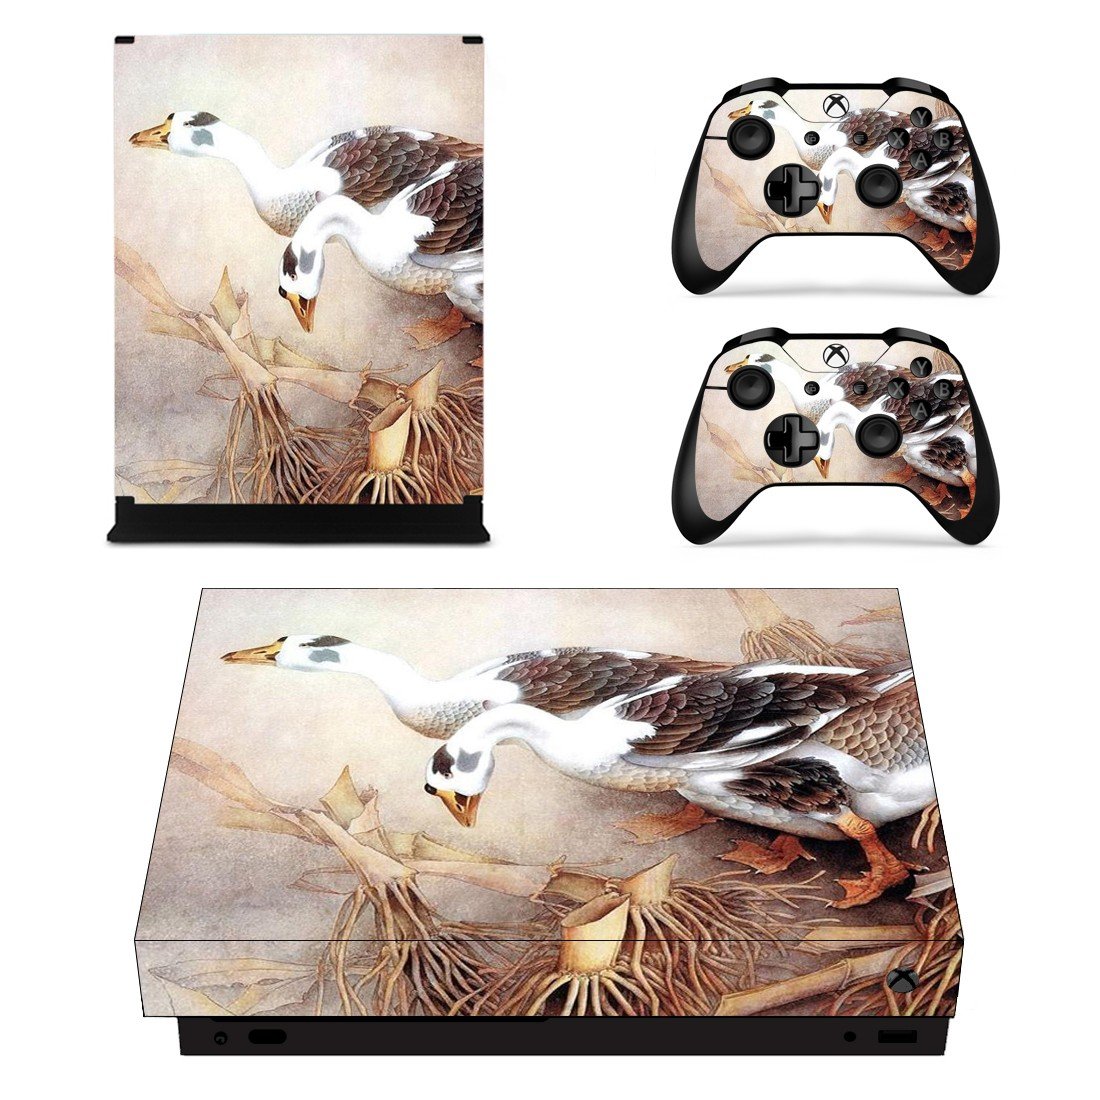 Swan Wallpaper Skin Sticker Decal for Xbox One X Controllers